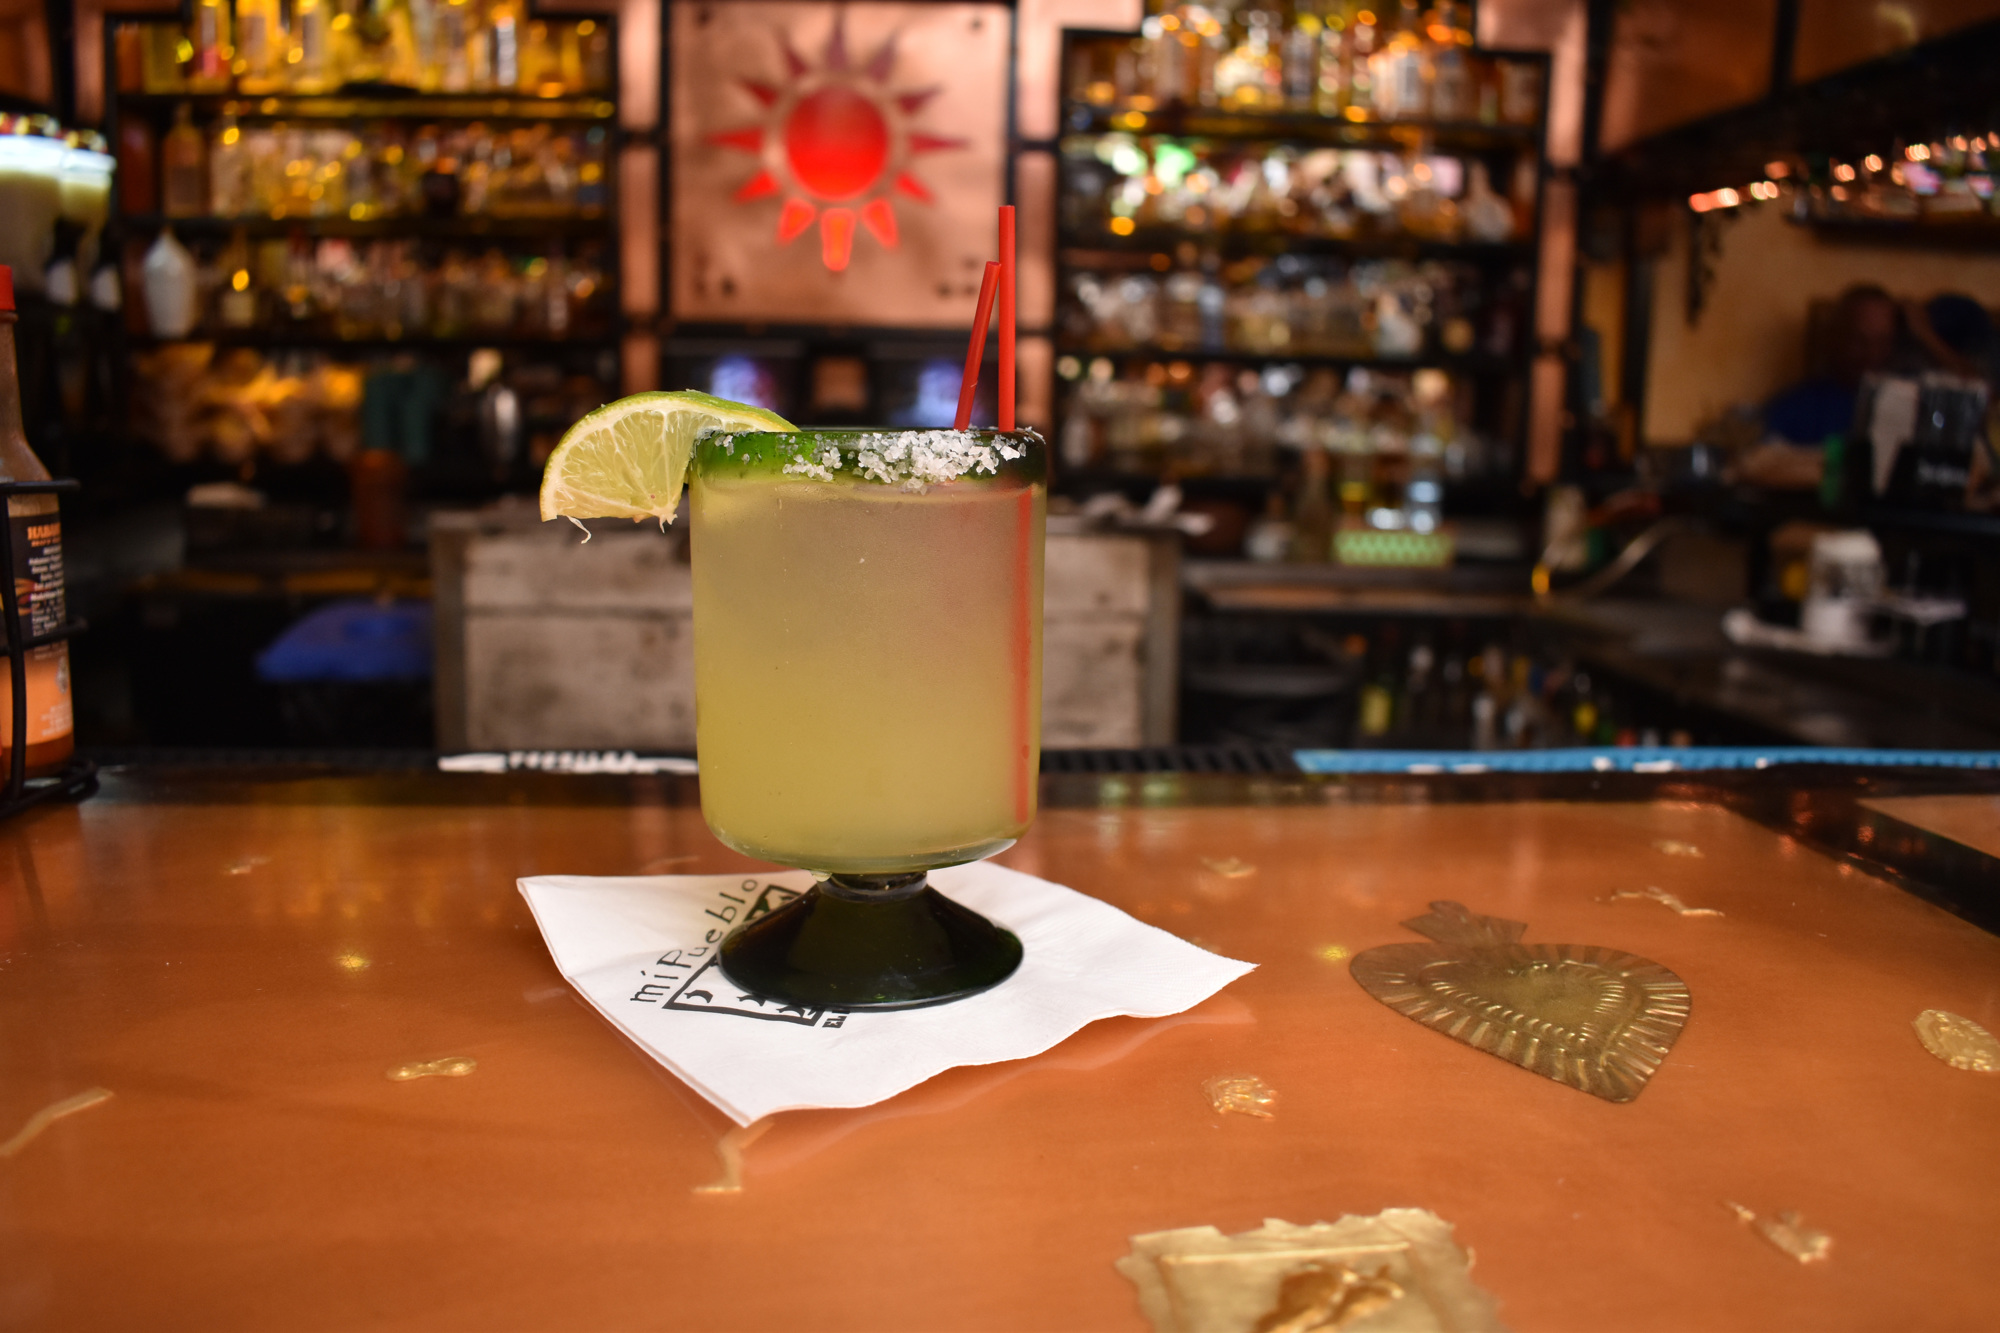  The house margarita is one of the most popular drinks during happy hour at Mi Pueblo. Photo by Niki Kottmann